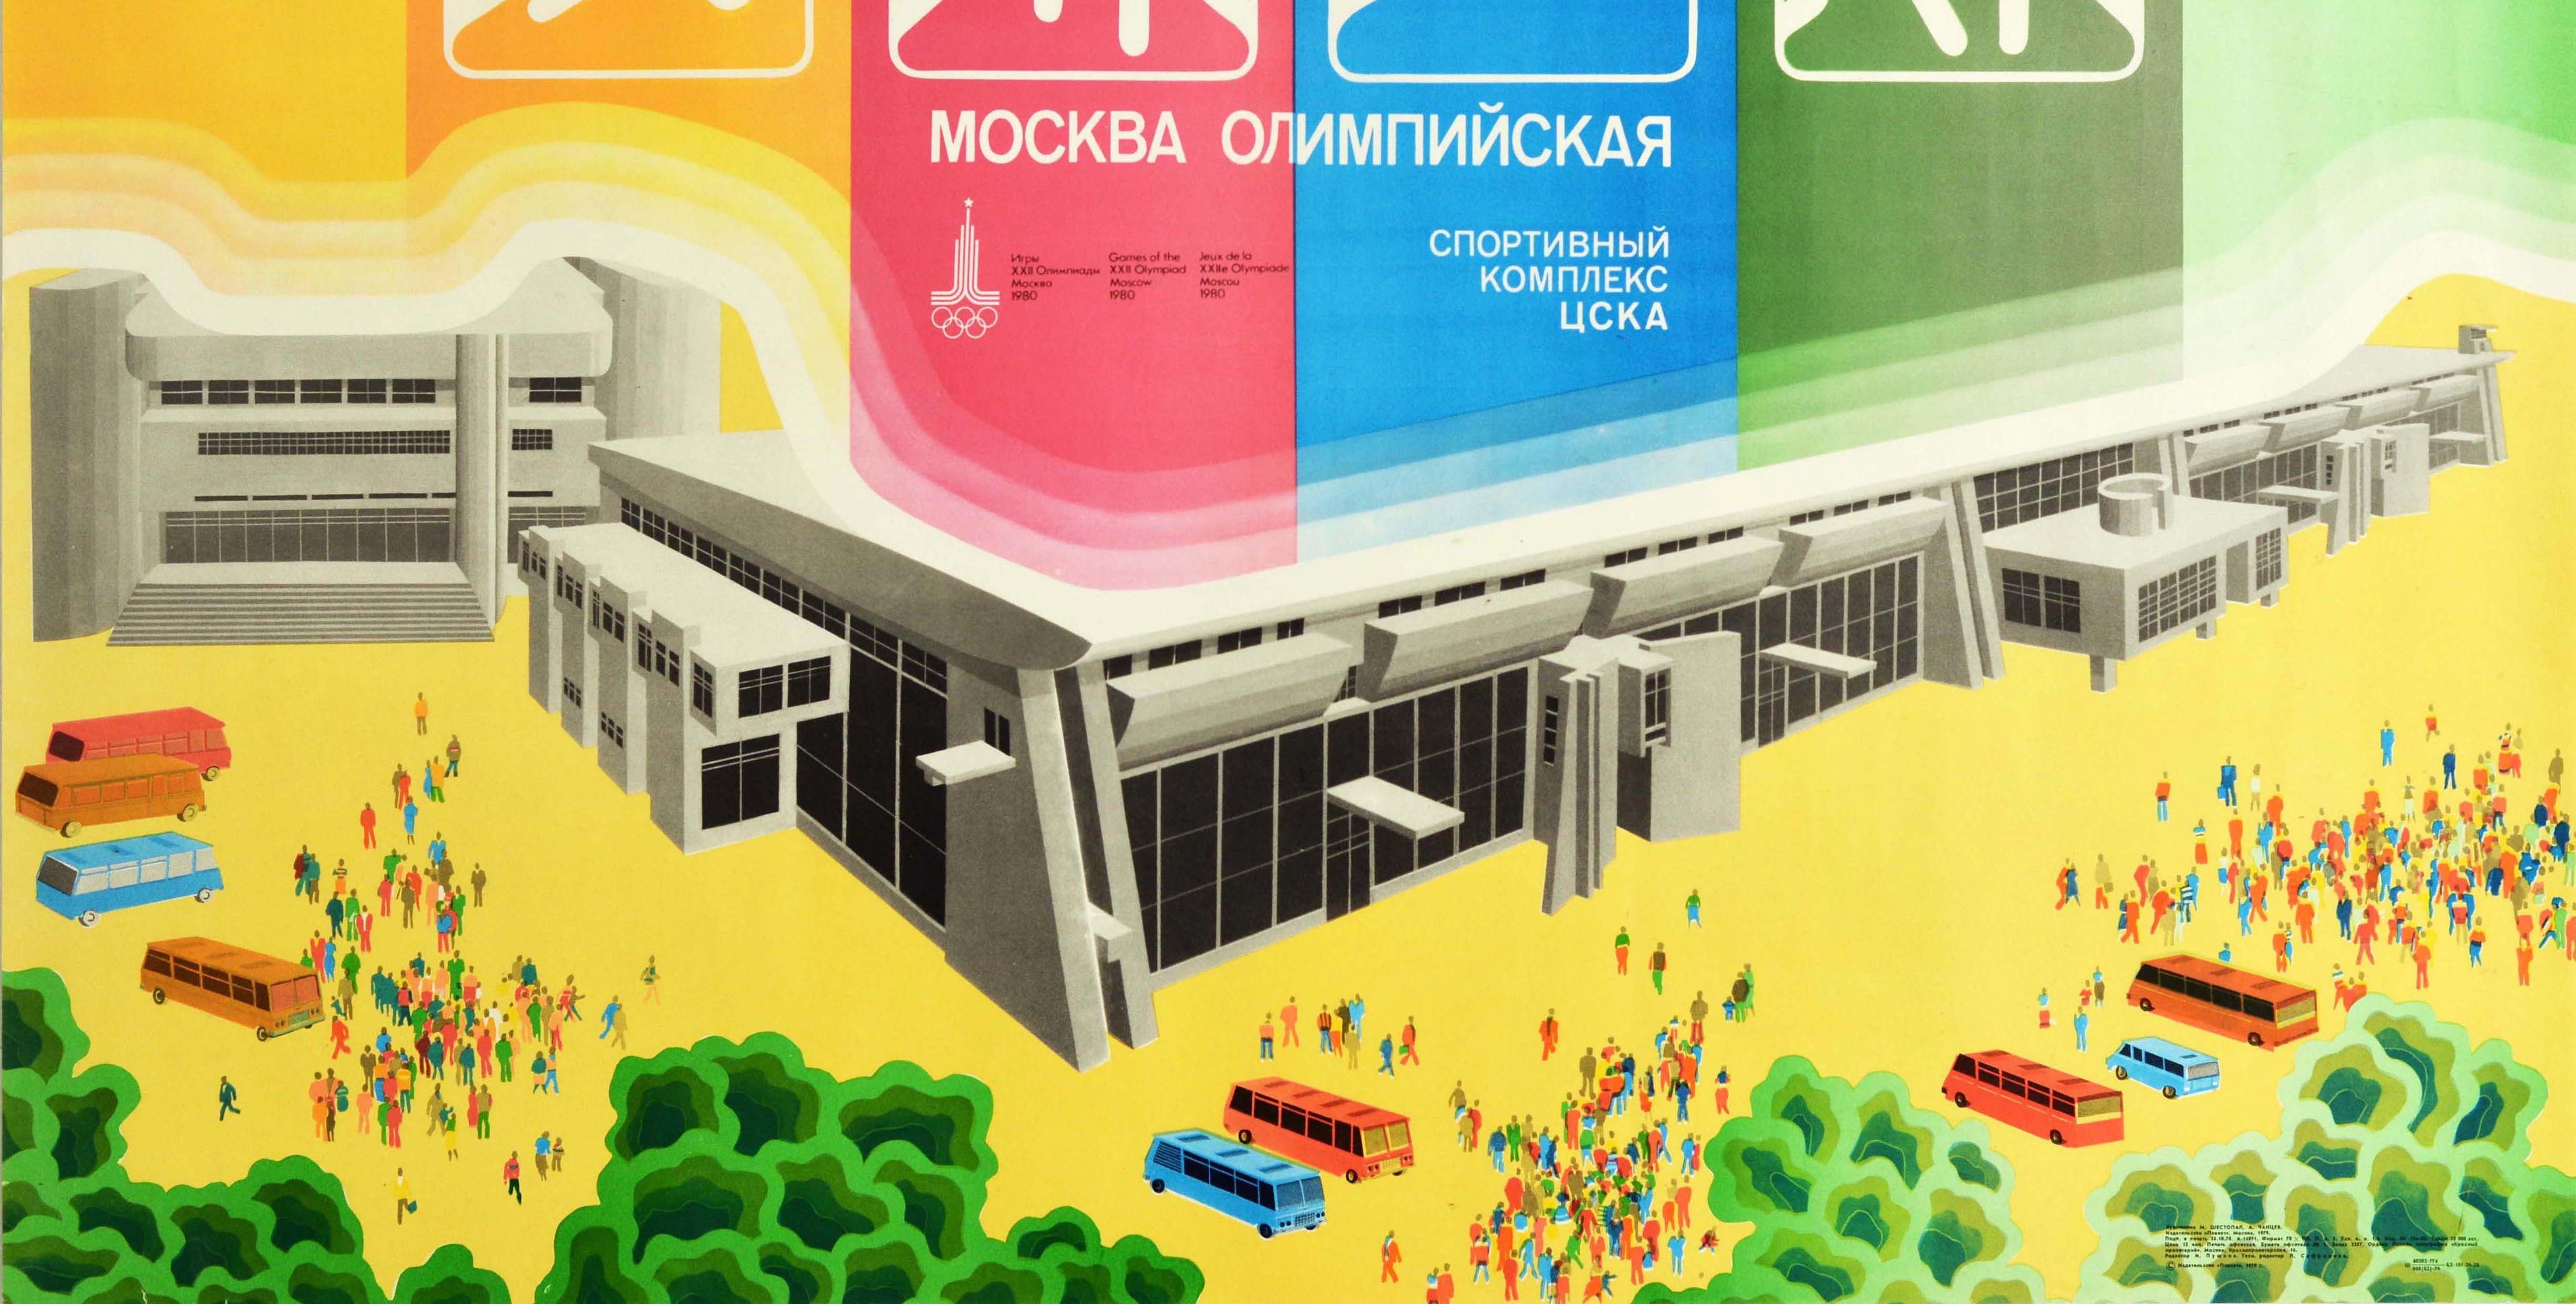 Original Vintage Poster 1980 Moscow Olympic Games CSKA Central Sports Club USSR - Yellow Print by M Shestopal A Chantsev